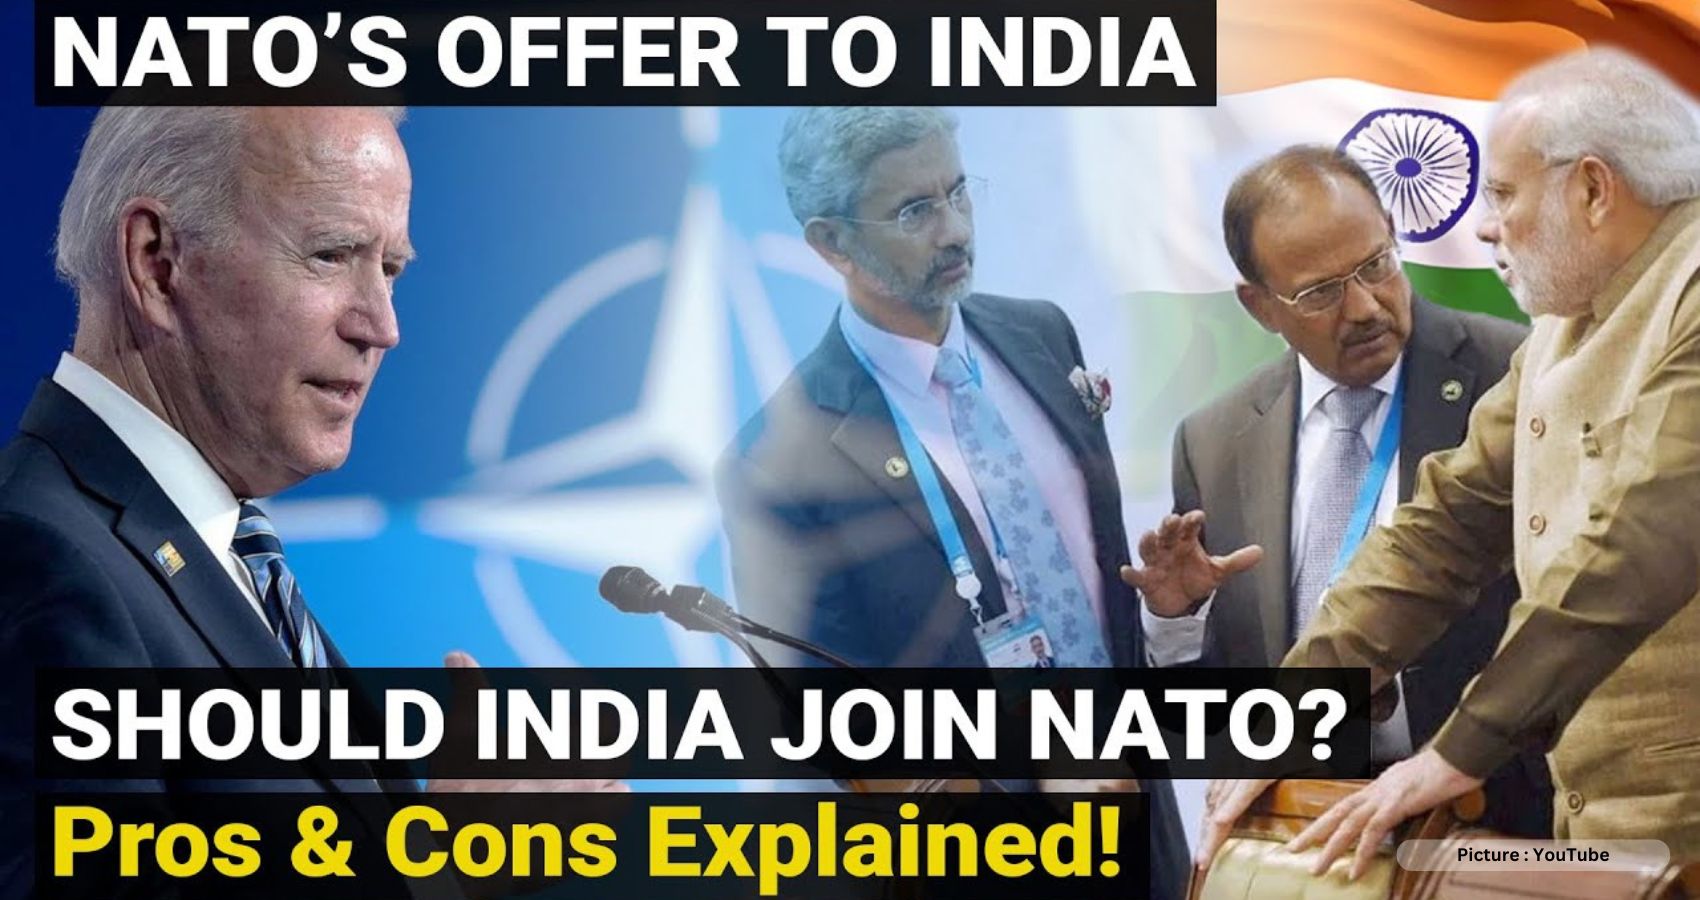 India Rejects Joining NATO, Insists on Countering Chinese Aggression Independently